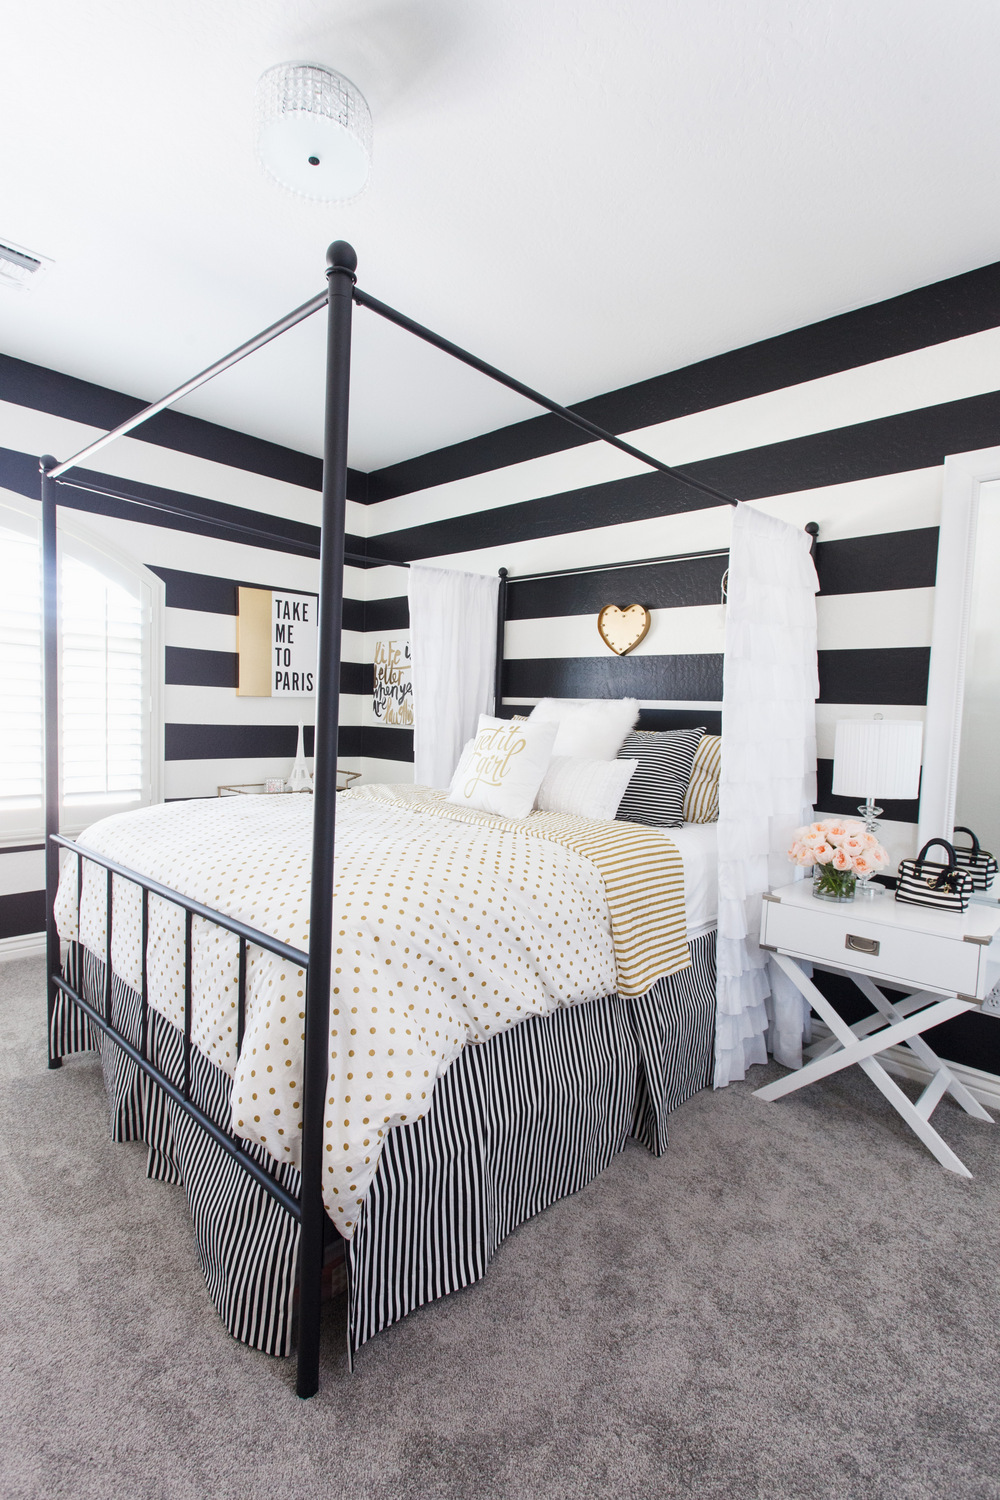 Kate's Black White Gold Bedroom with Striped Walls